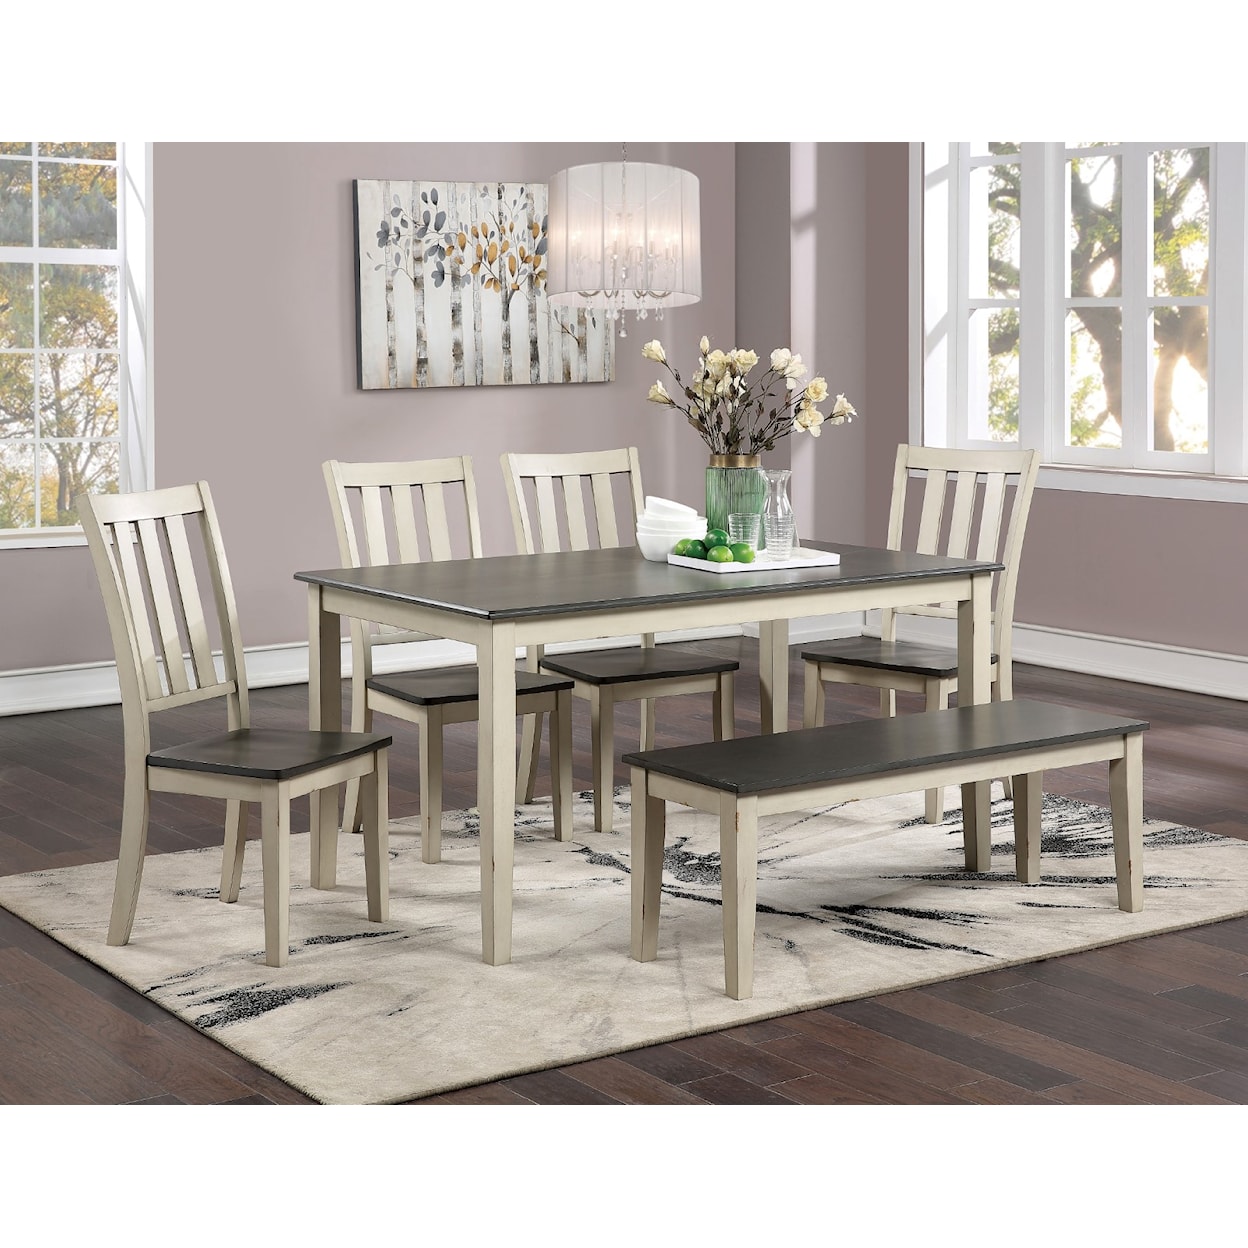 Furniture of America Frances Dining Table